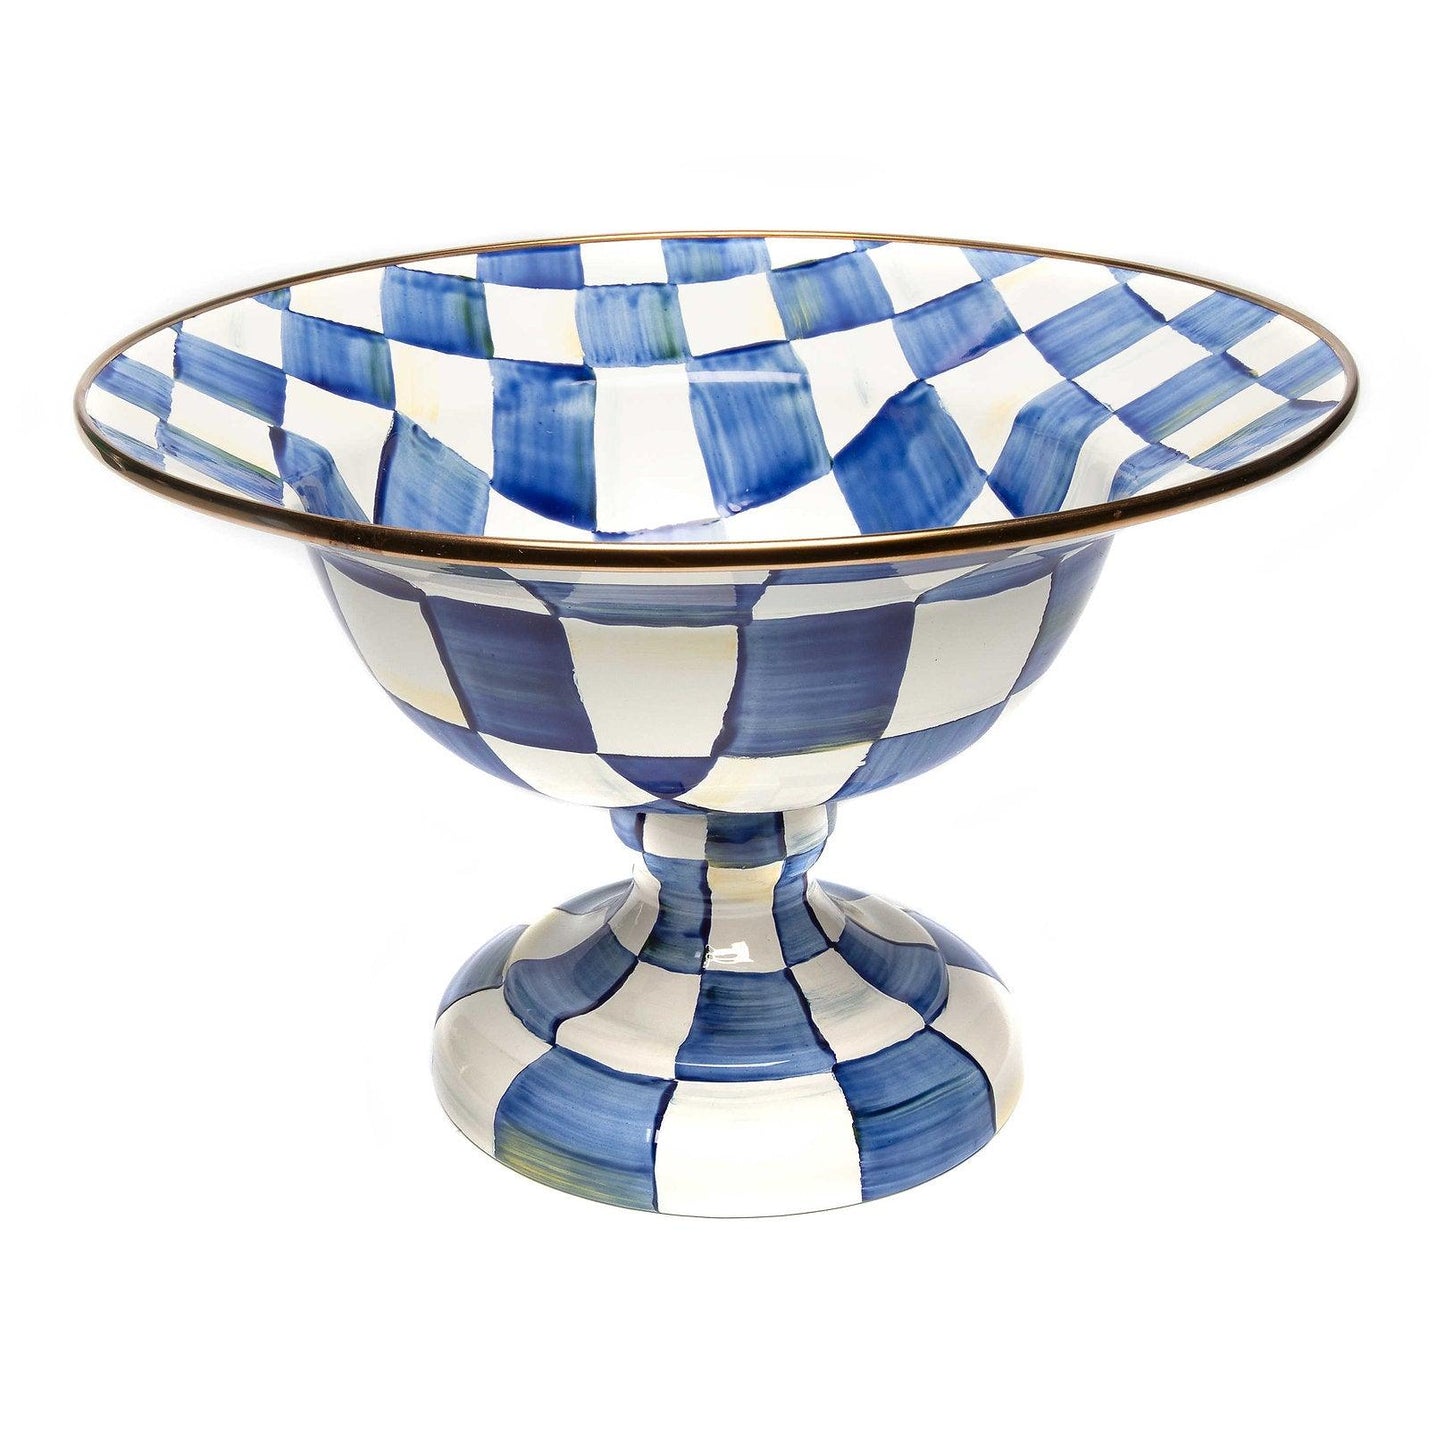 Royal Check Enamel Compote - Large (Mackenzie Childs) - Gallery Gifts Online 